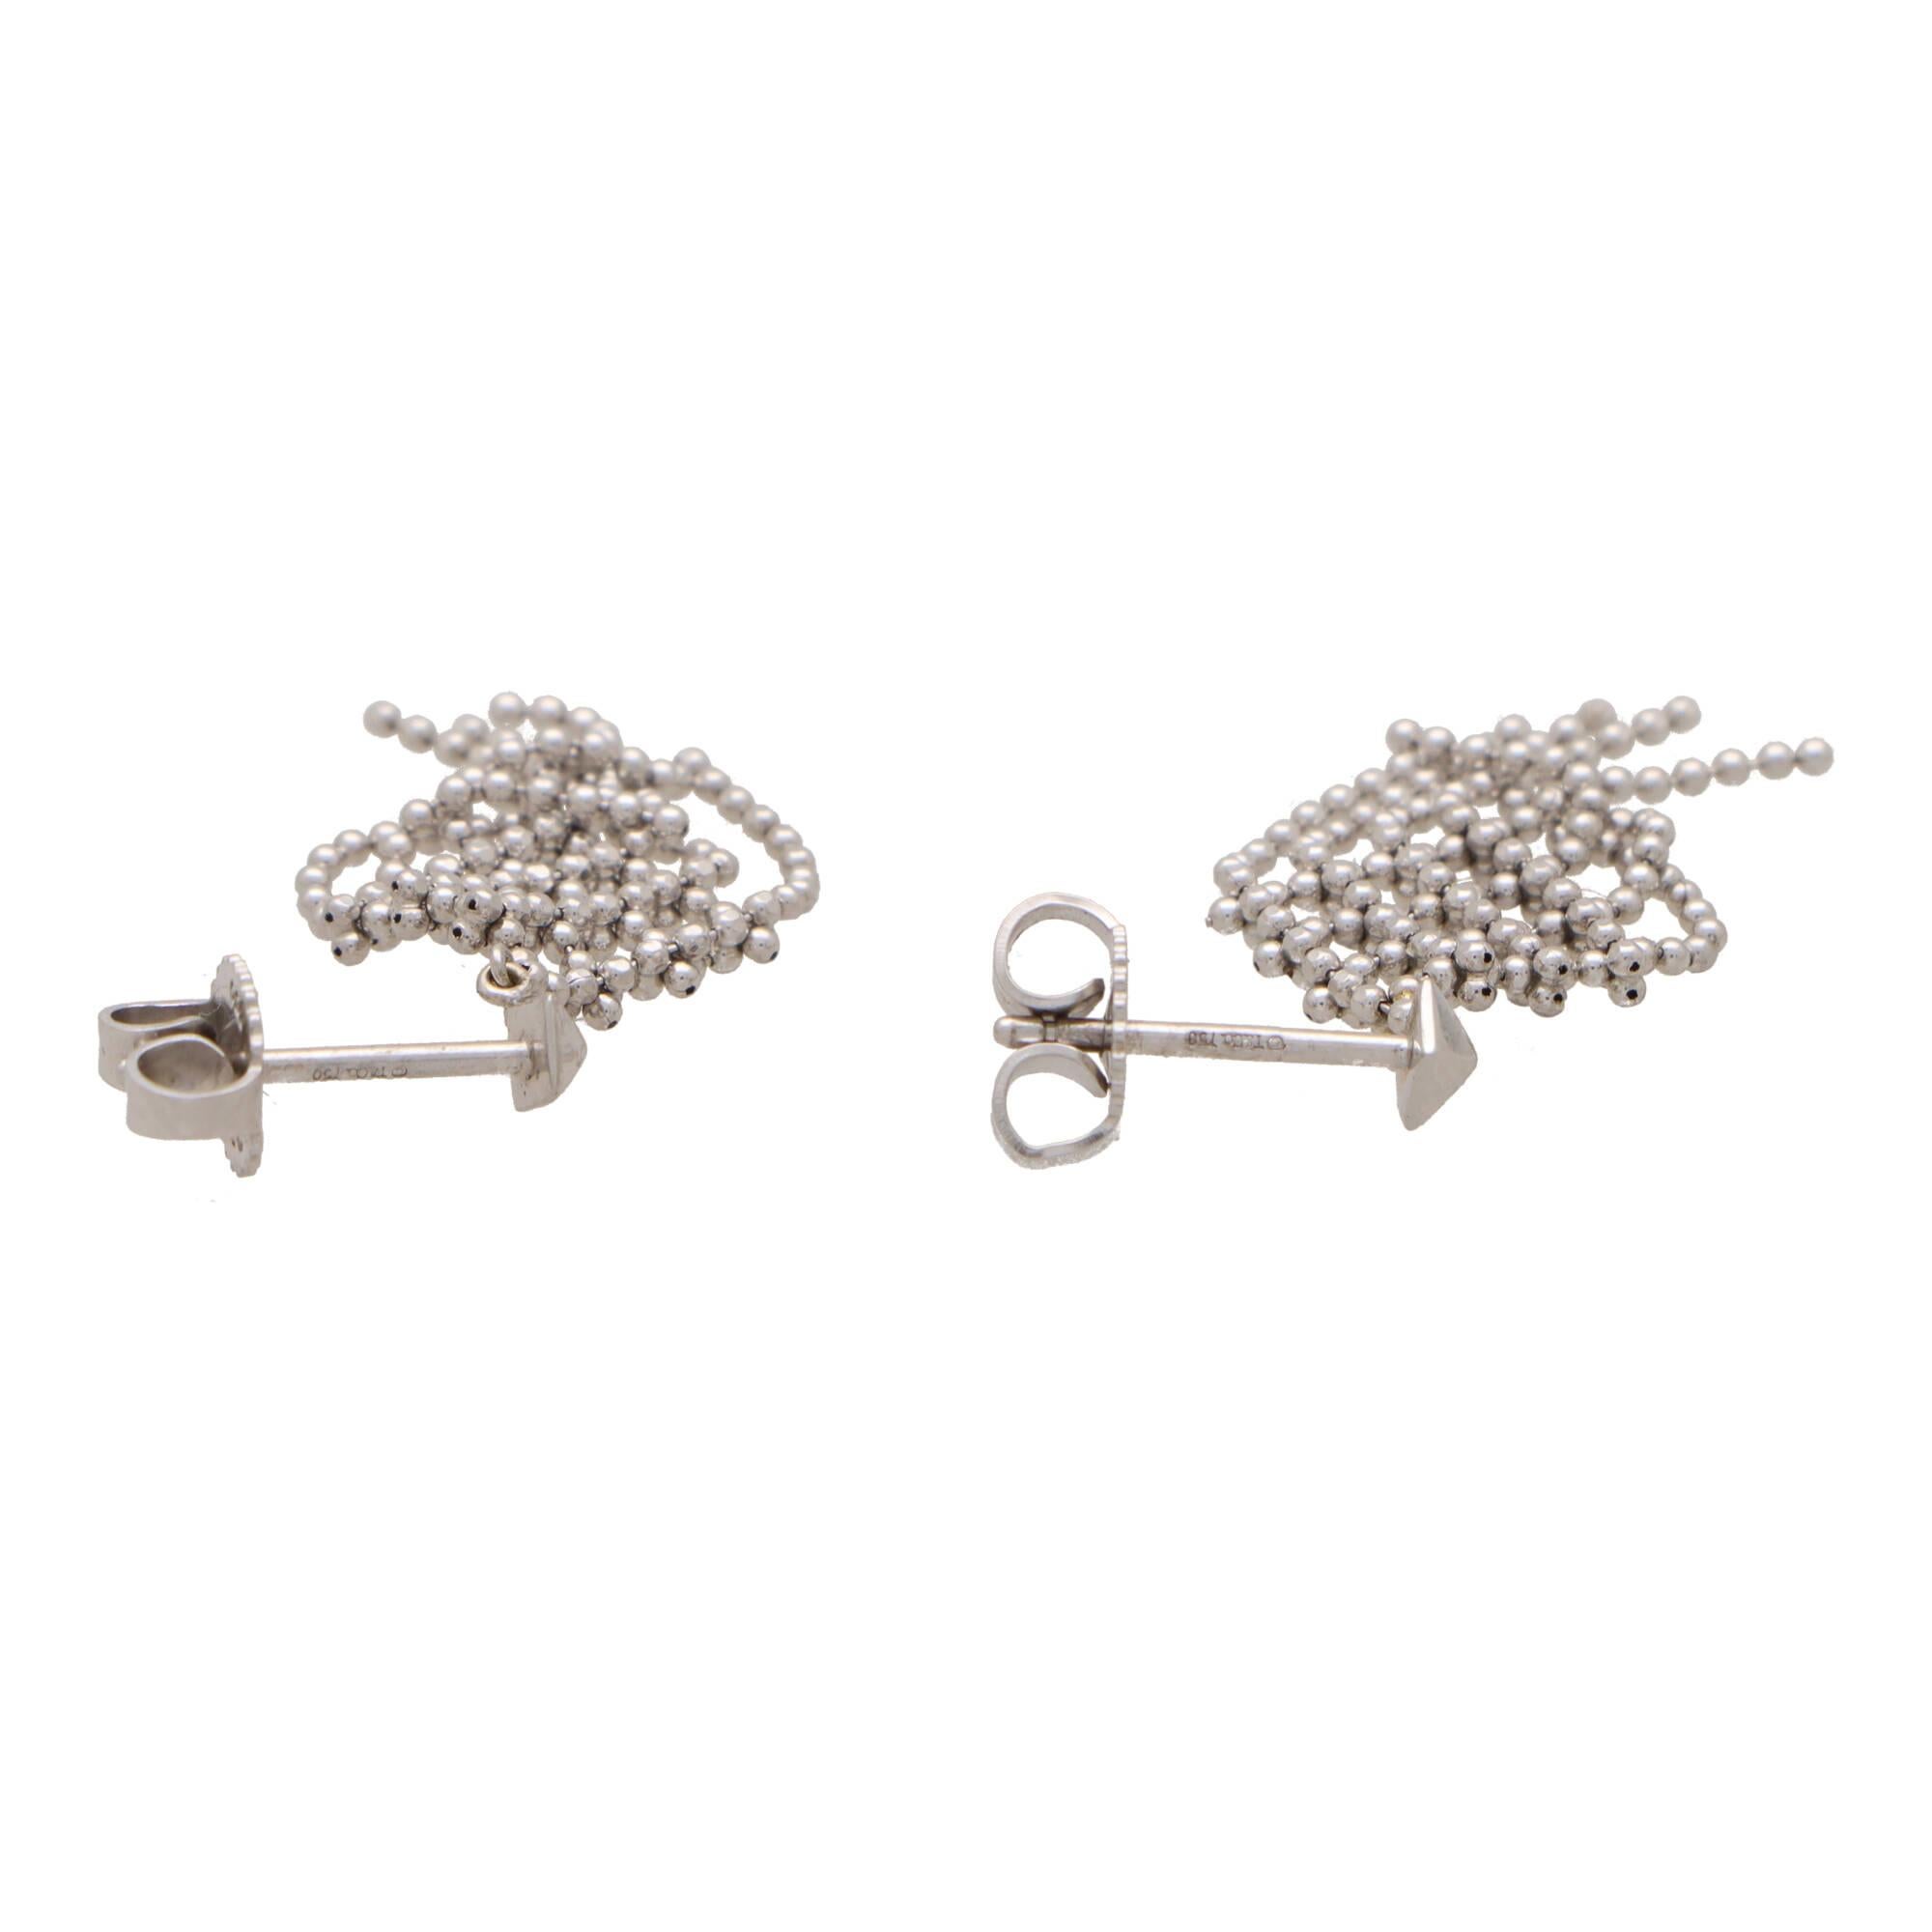 Vintage Tiffany & Co. Woven Tassel Drop Earrings in 18k White Gold In Excellent Condition For Sale In London, GB